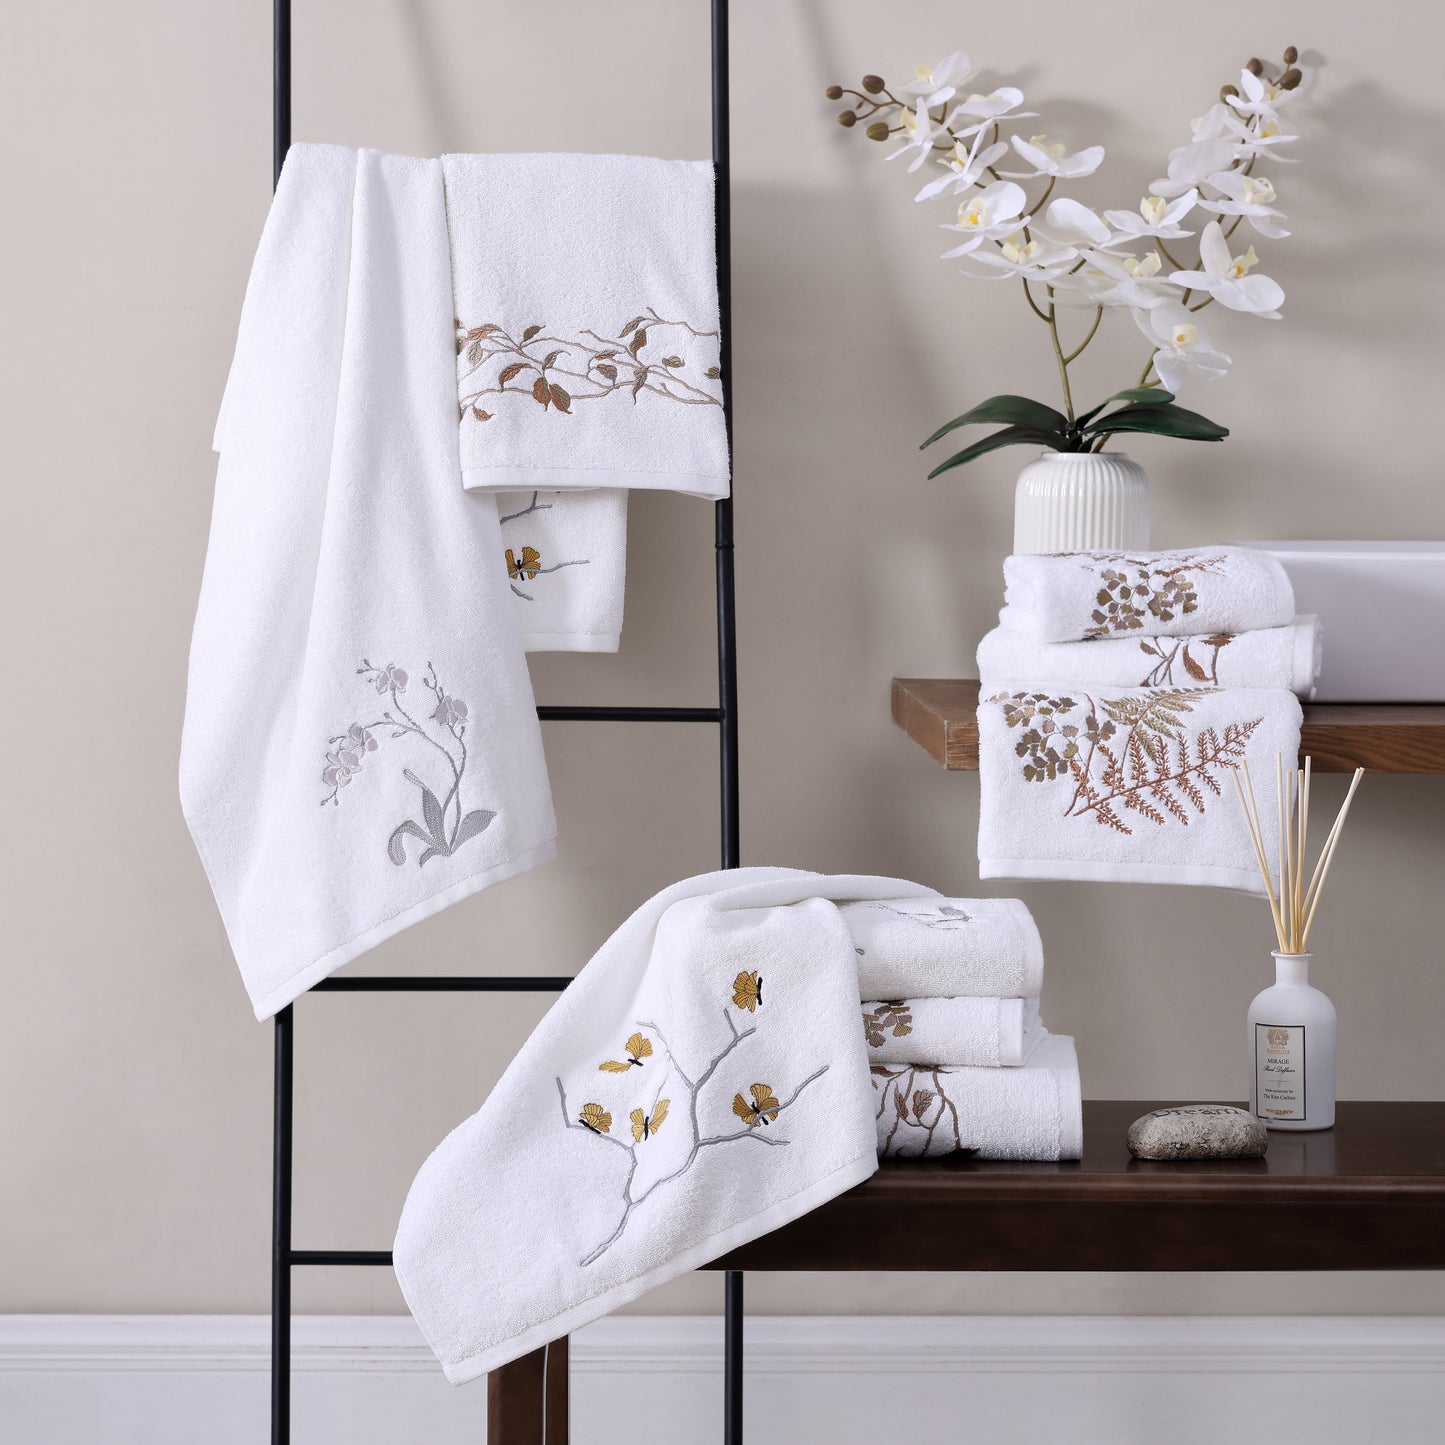 Michael Aram Branch Embroidered Guest Towel Set